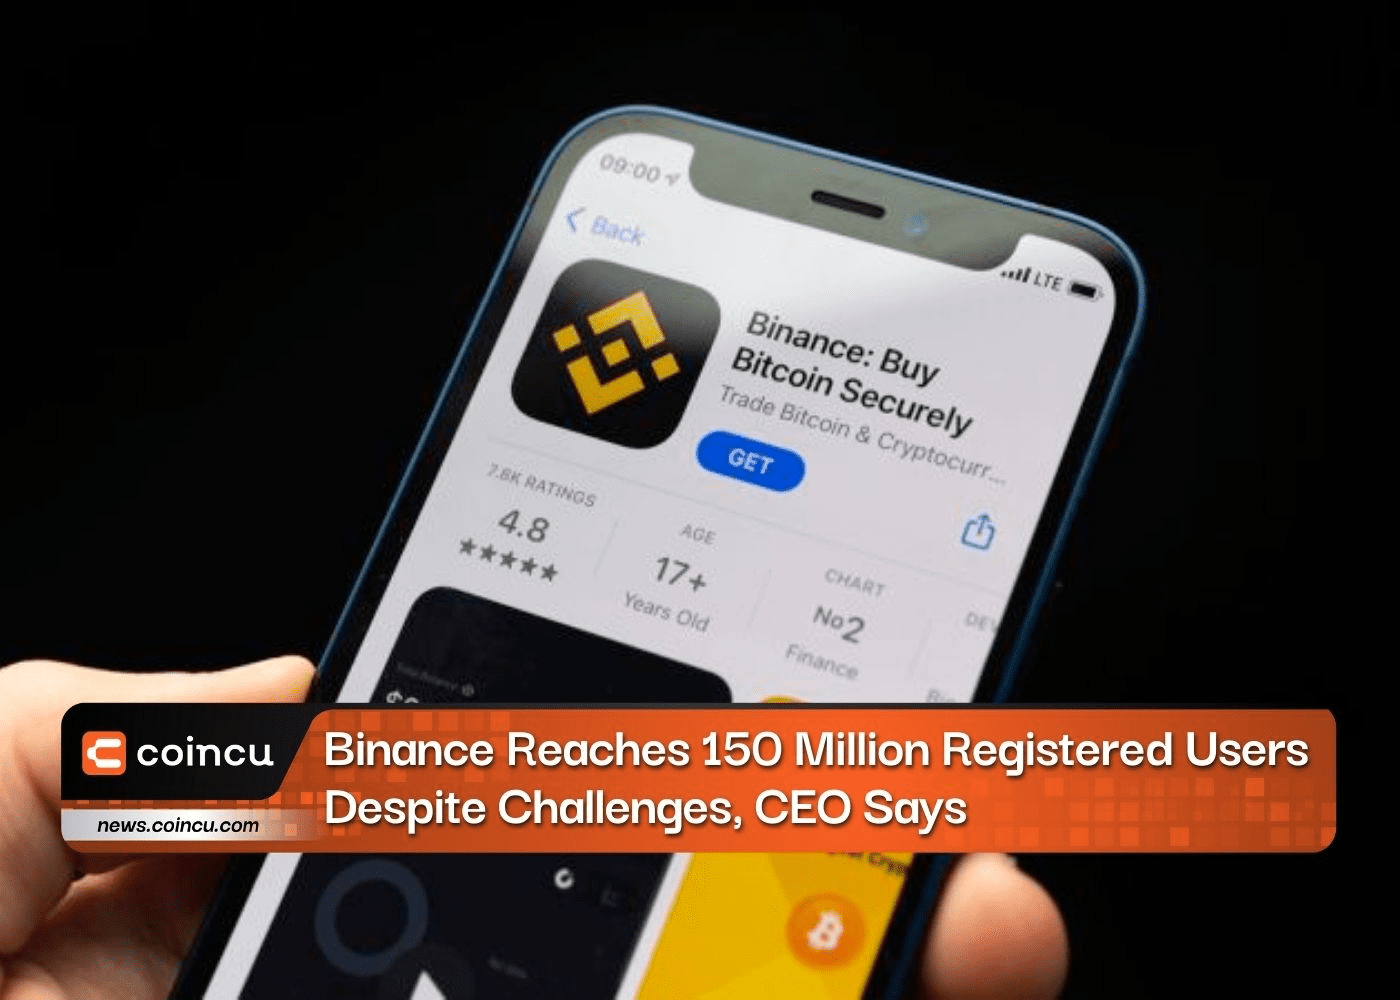 Binance Reaches 150 Million Registered Users Despite Challenges, CEO Says